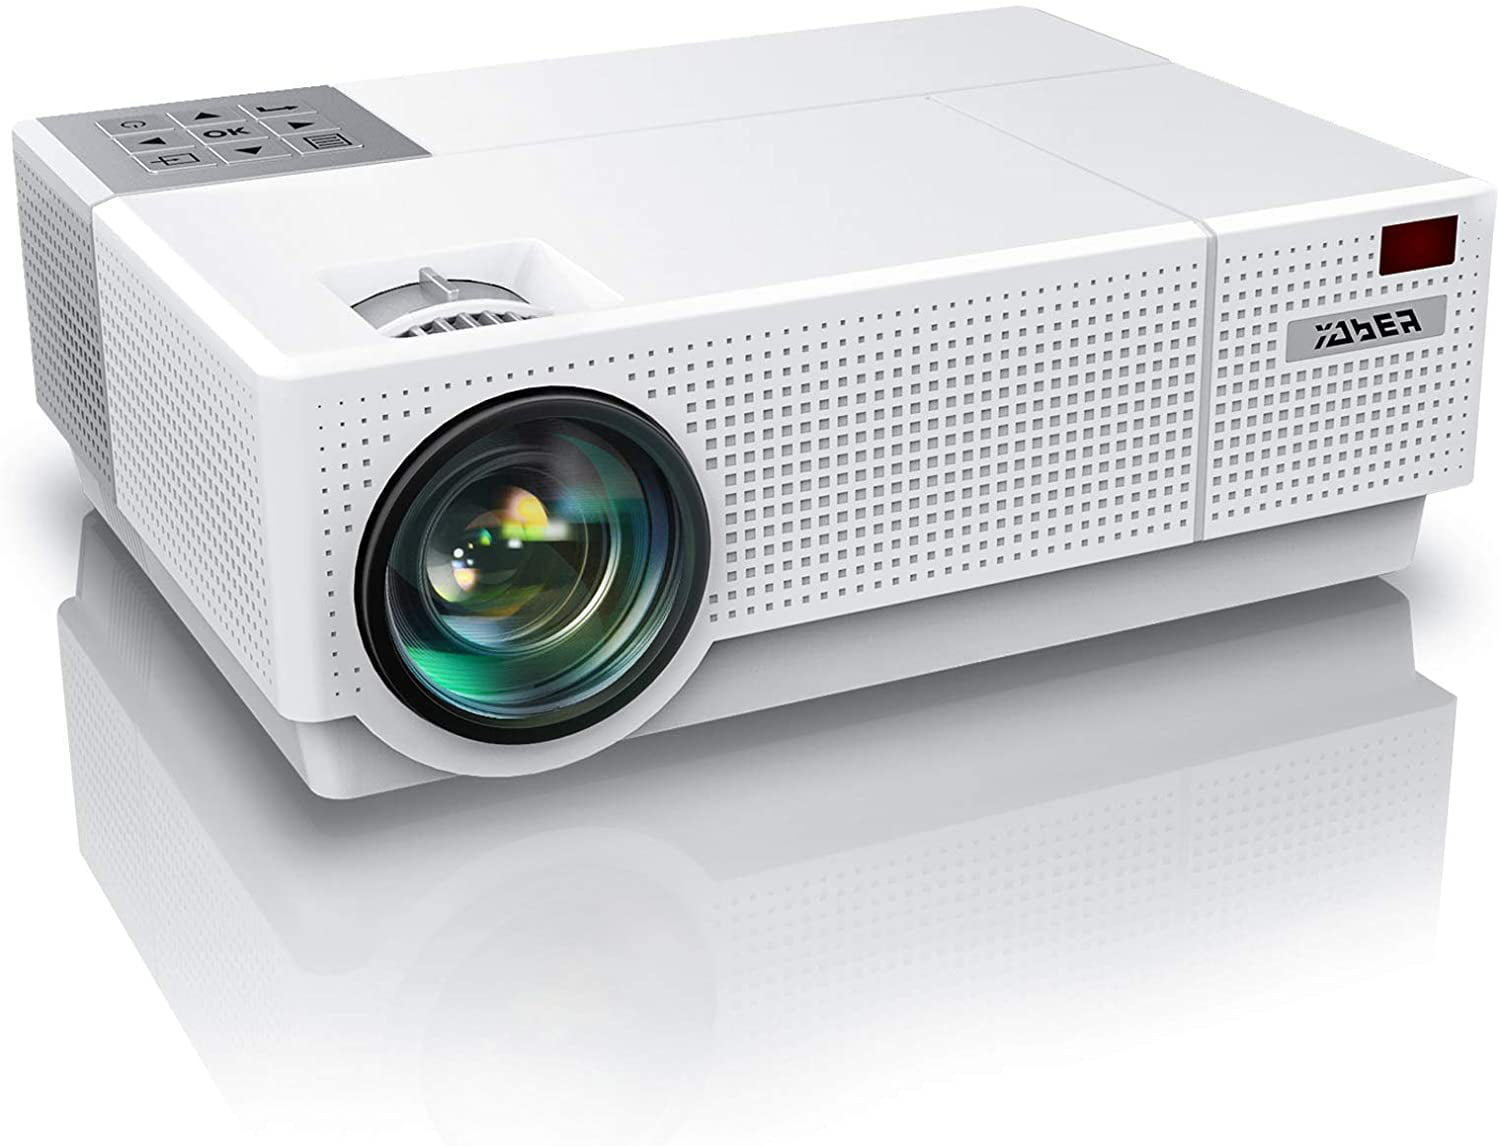 Native 1080P Projector YABER Movie Projector with 5500 Lumens 70,000 Hours X/Y Zoom Function Full HD Video Projector Compatible with iPhone,Android,PC,TV Box,PS4 for Home/Outdoor/Gaming 